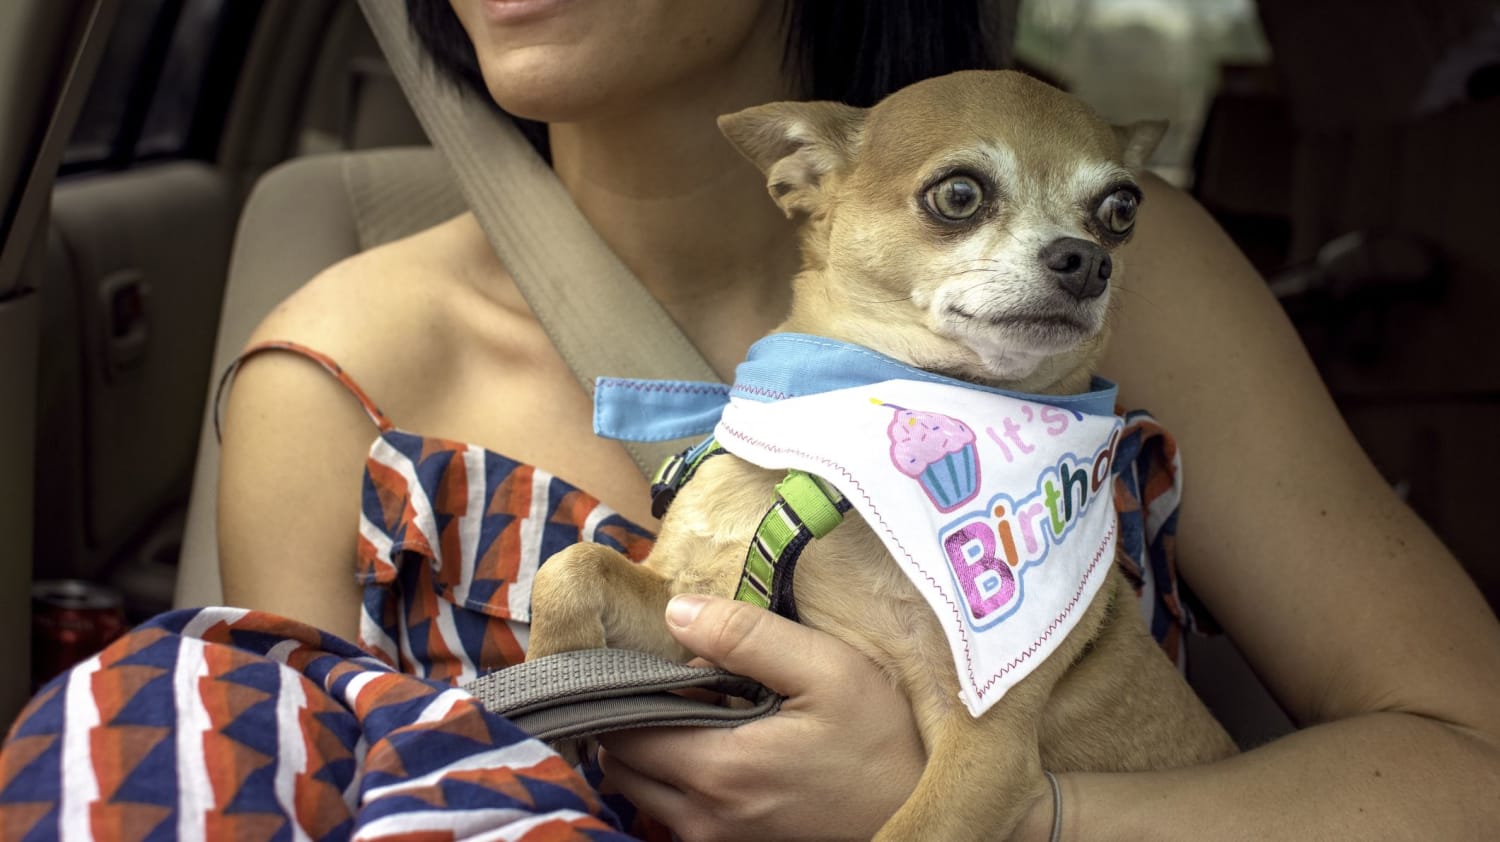 Why Are Small Dogs So Anxious All the Time?